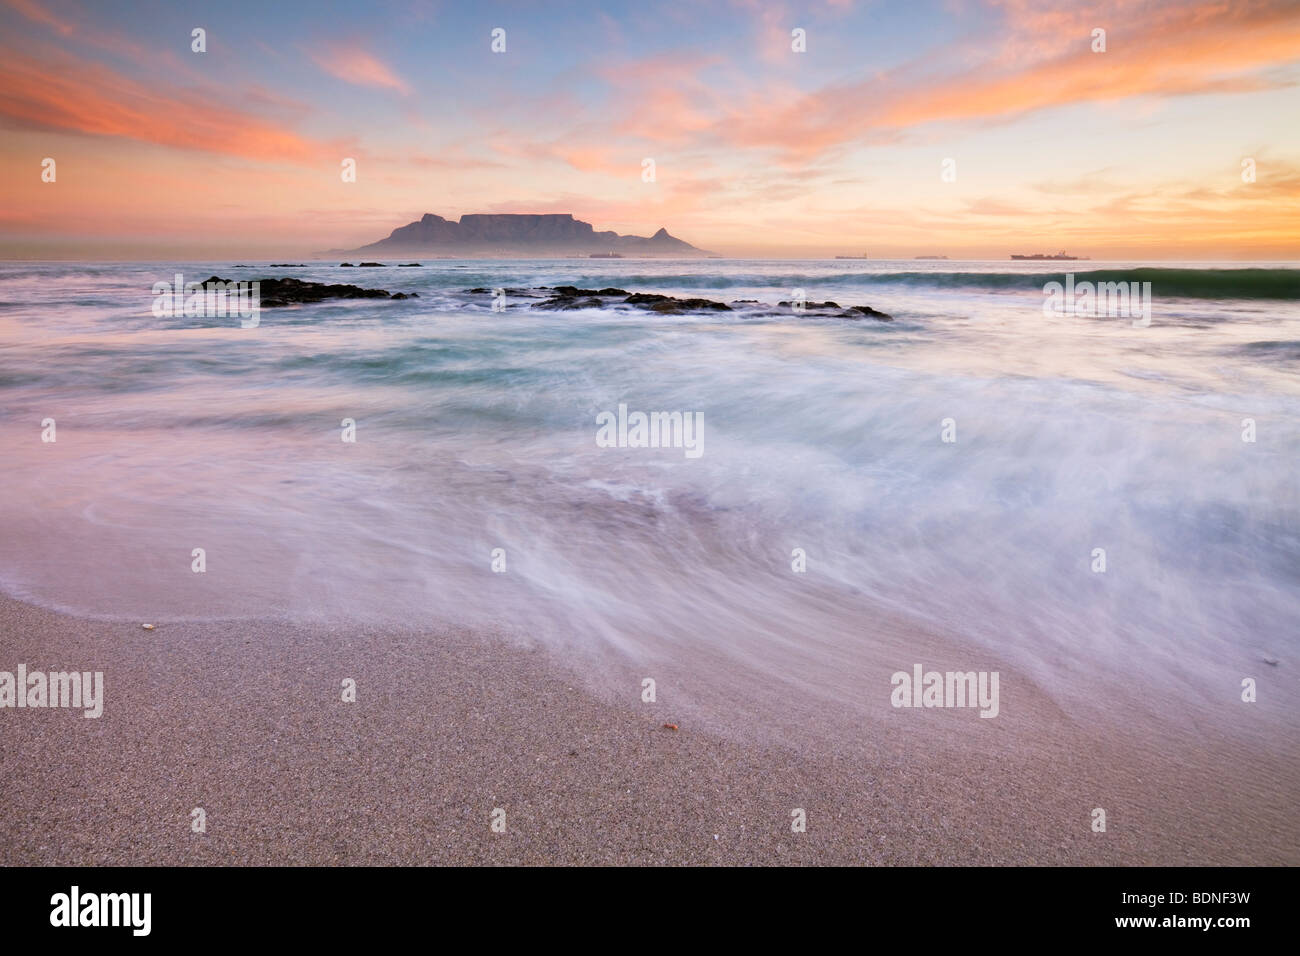 Surf on beach at Table Bay, with Table Mountain in background at sunset, Bloubergstrand, Western Cape Province, South Africa Stock Photo